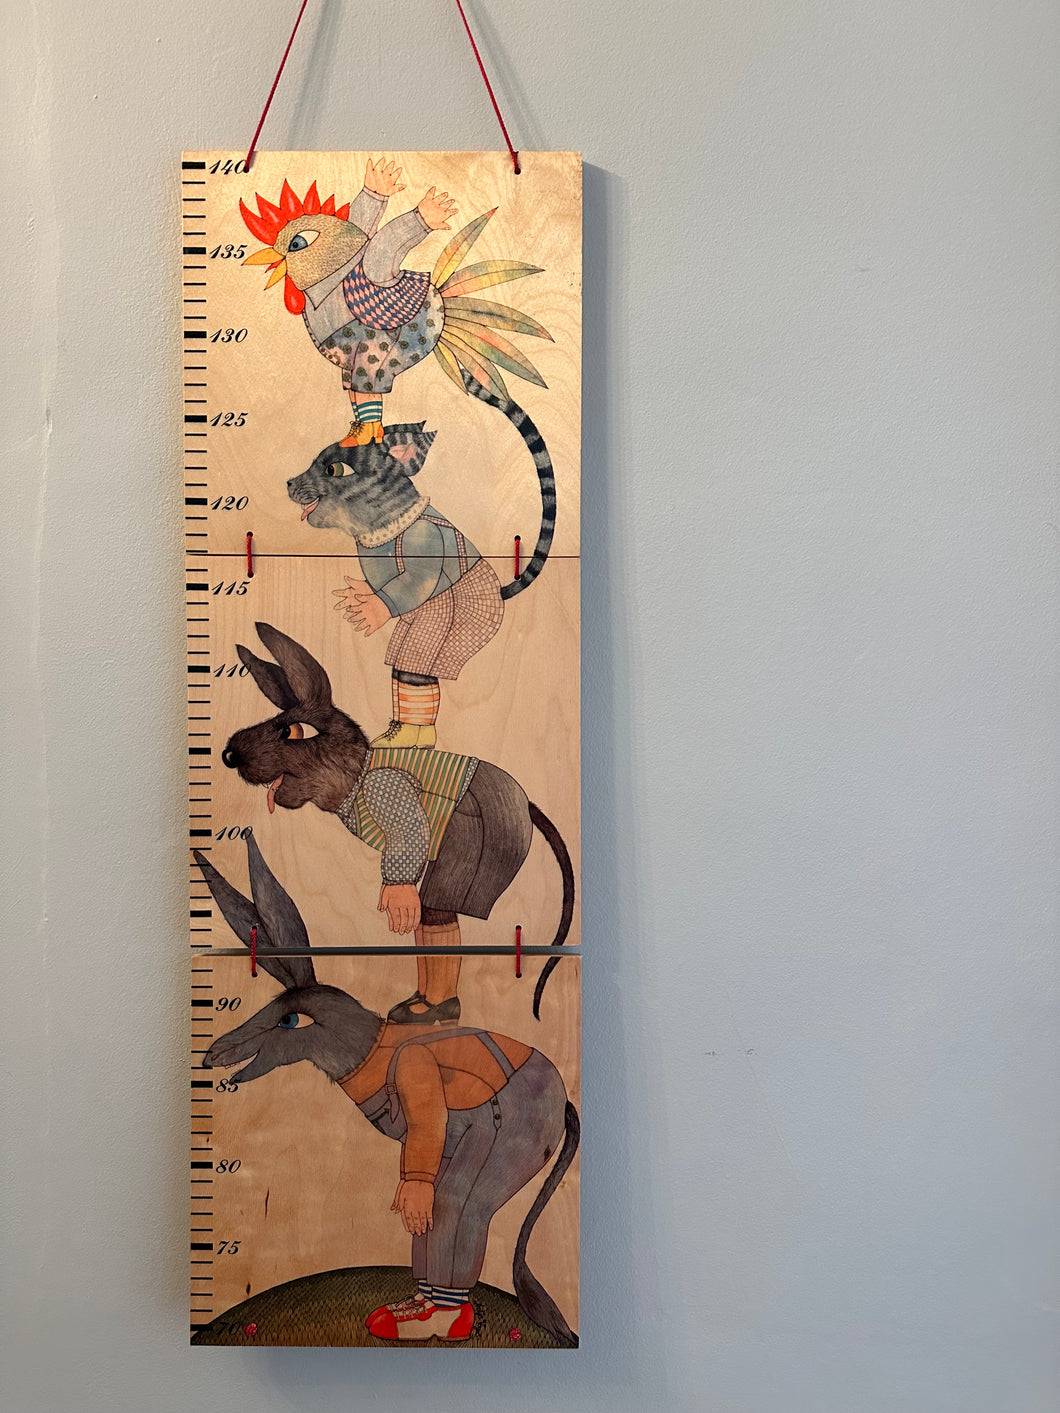 Vintage 'Musicians of Bremen' animal themed wooden height chart / growth chart / measuring stick, by Italian toy brand Sevi 1831 - Moppet